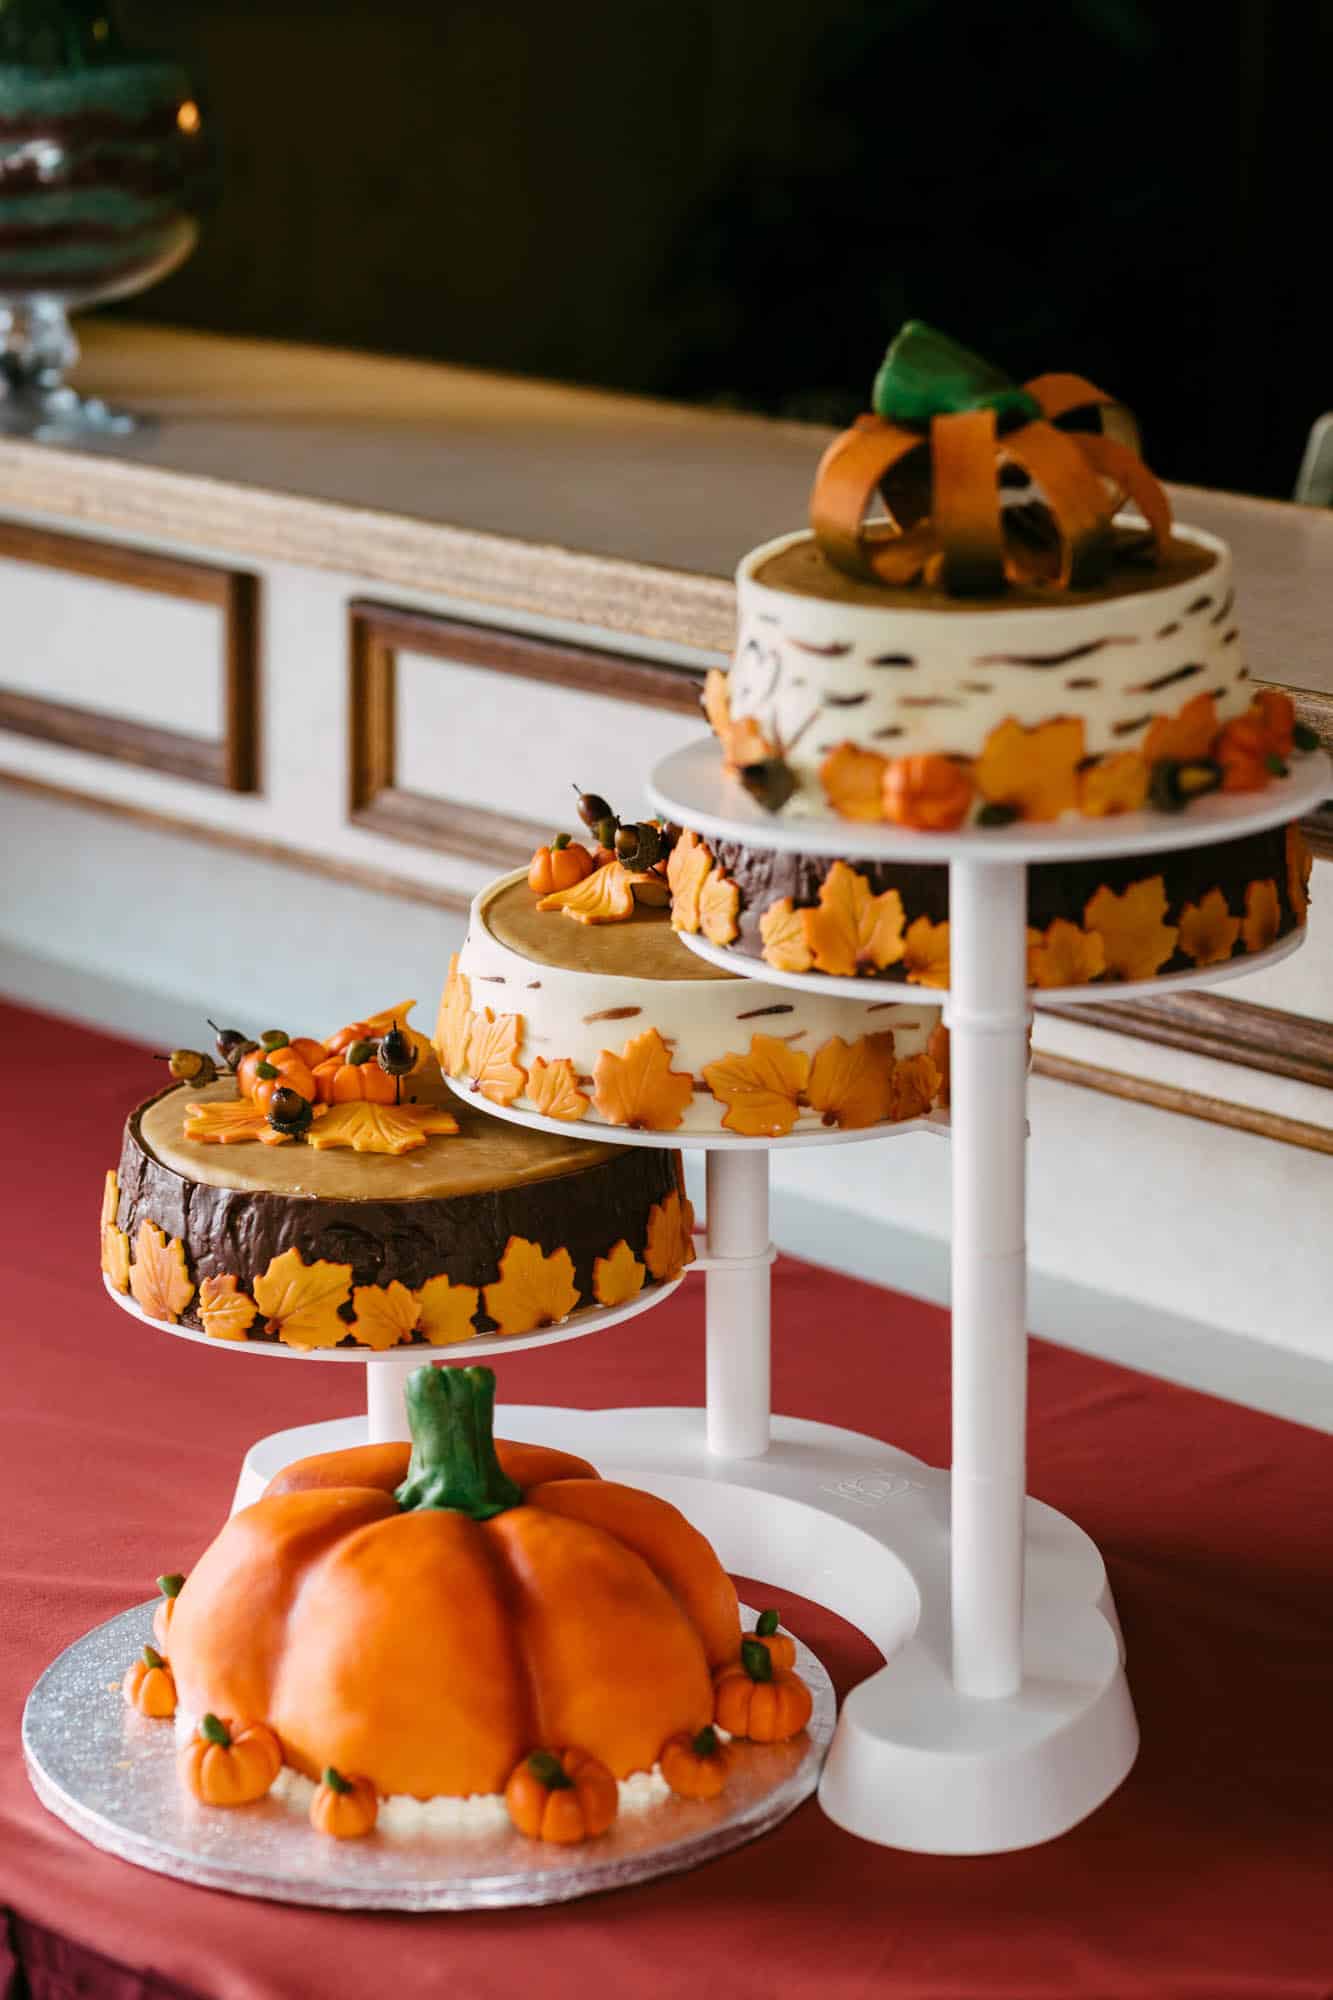 A three-tier cake tray with pumpkins on top, perfect for displaying wedding cakes.